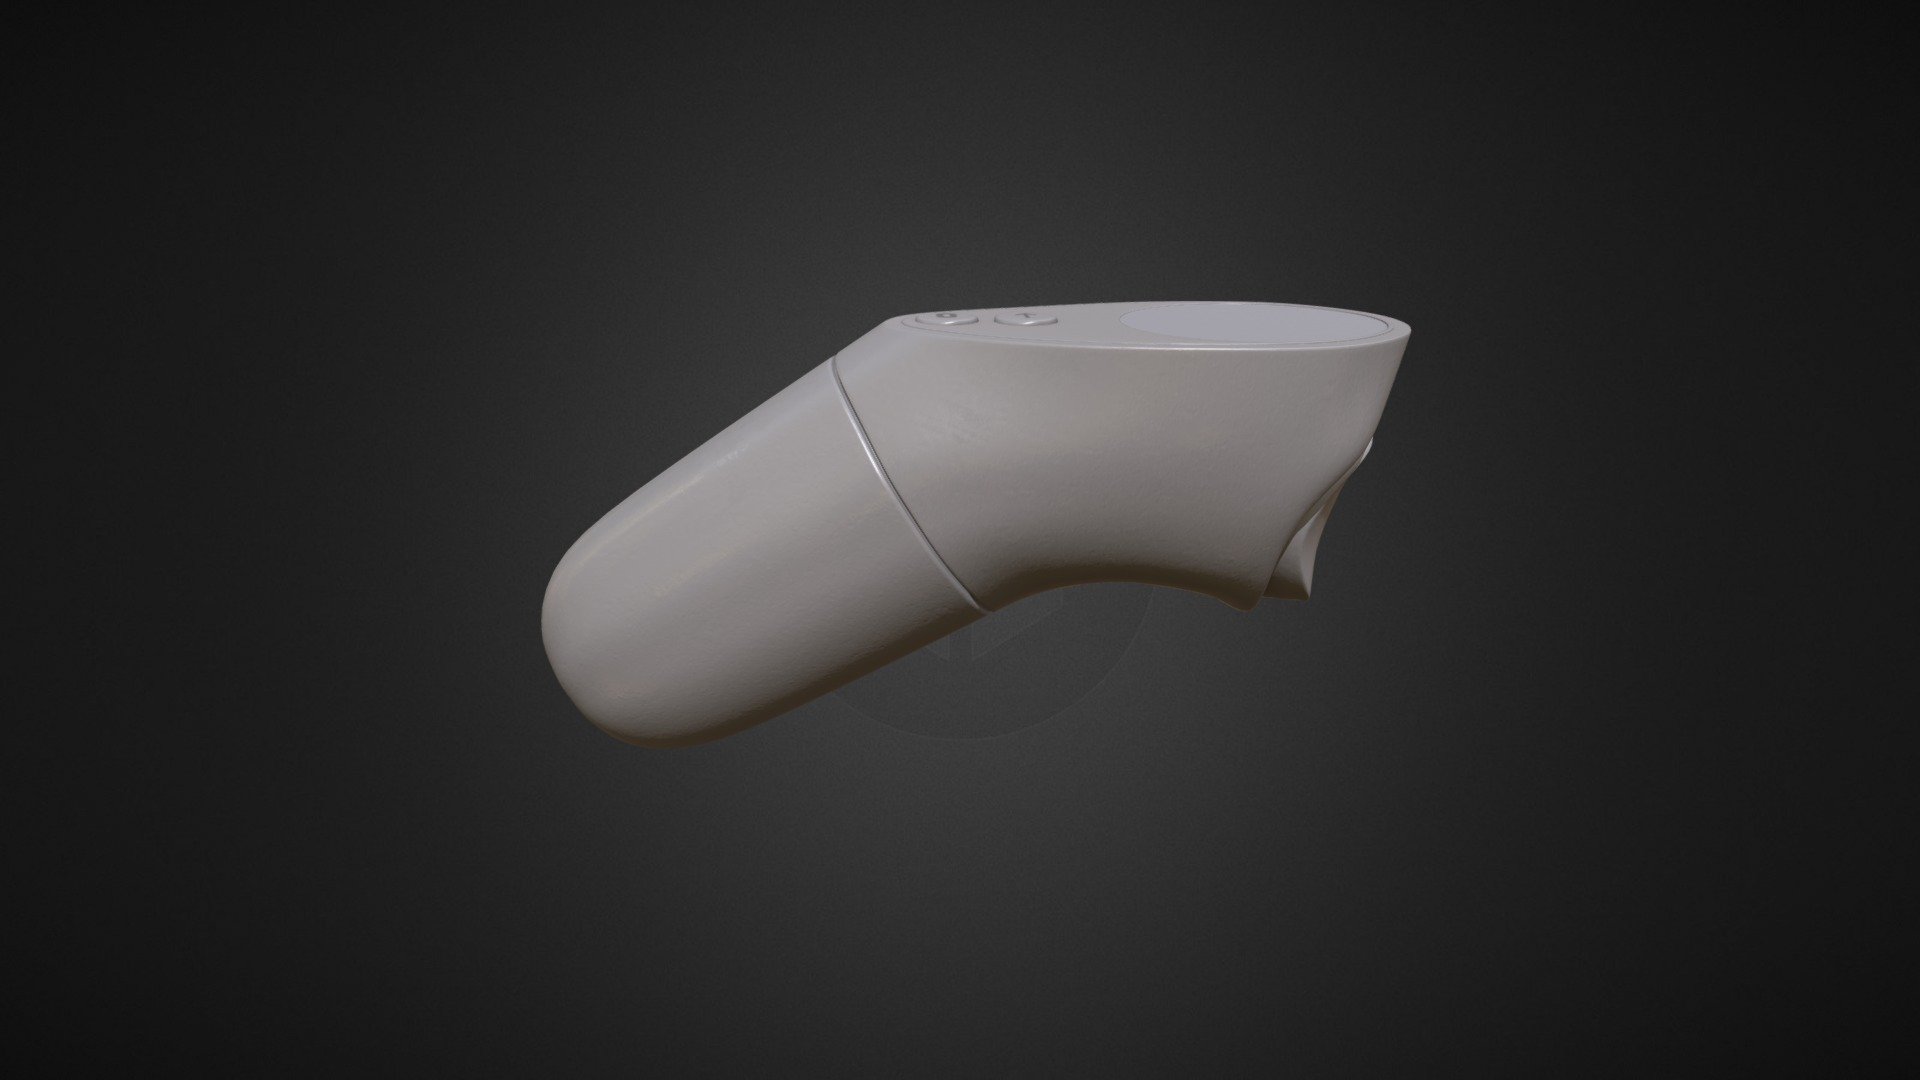 You need a Oculus Go Controller Model for your UE4 Project? Then this is what you need! - Oculus Go Controller - 3D model by LYRAT (@fbam) 3d model